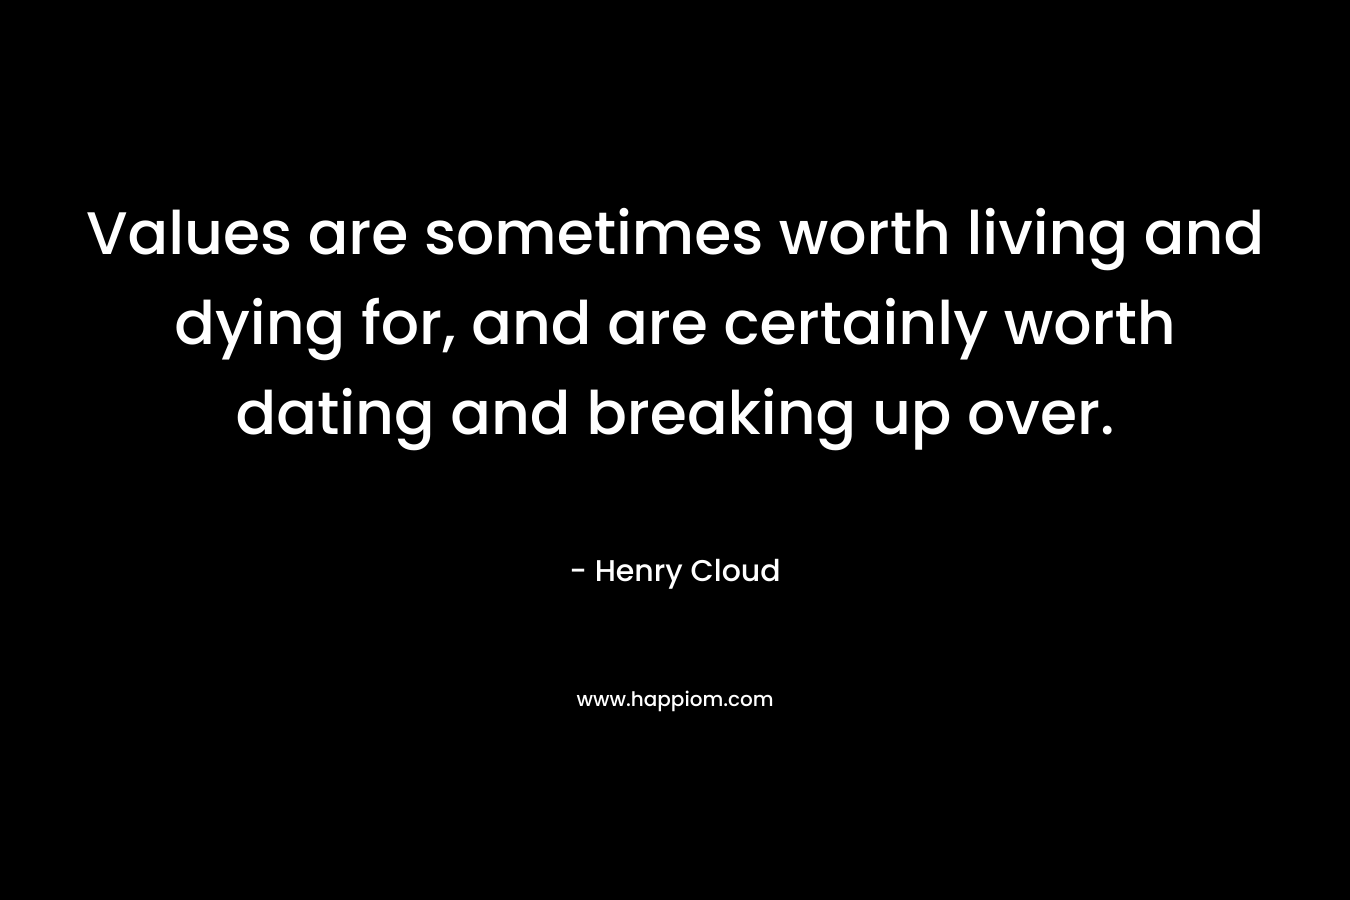 Values are sometimes worth living and dying for, and are certainly worth dating and breaking up over.